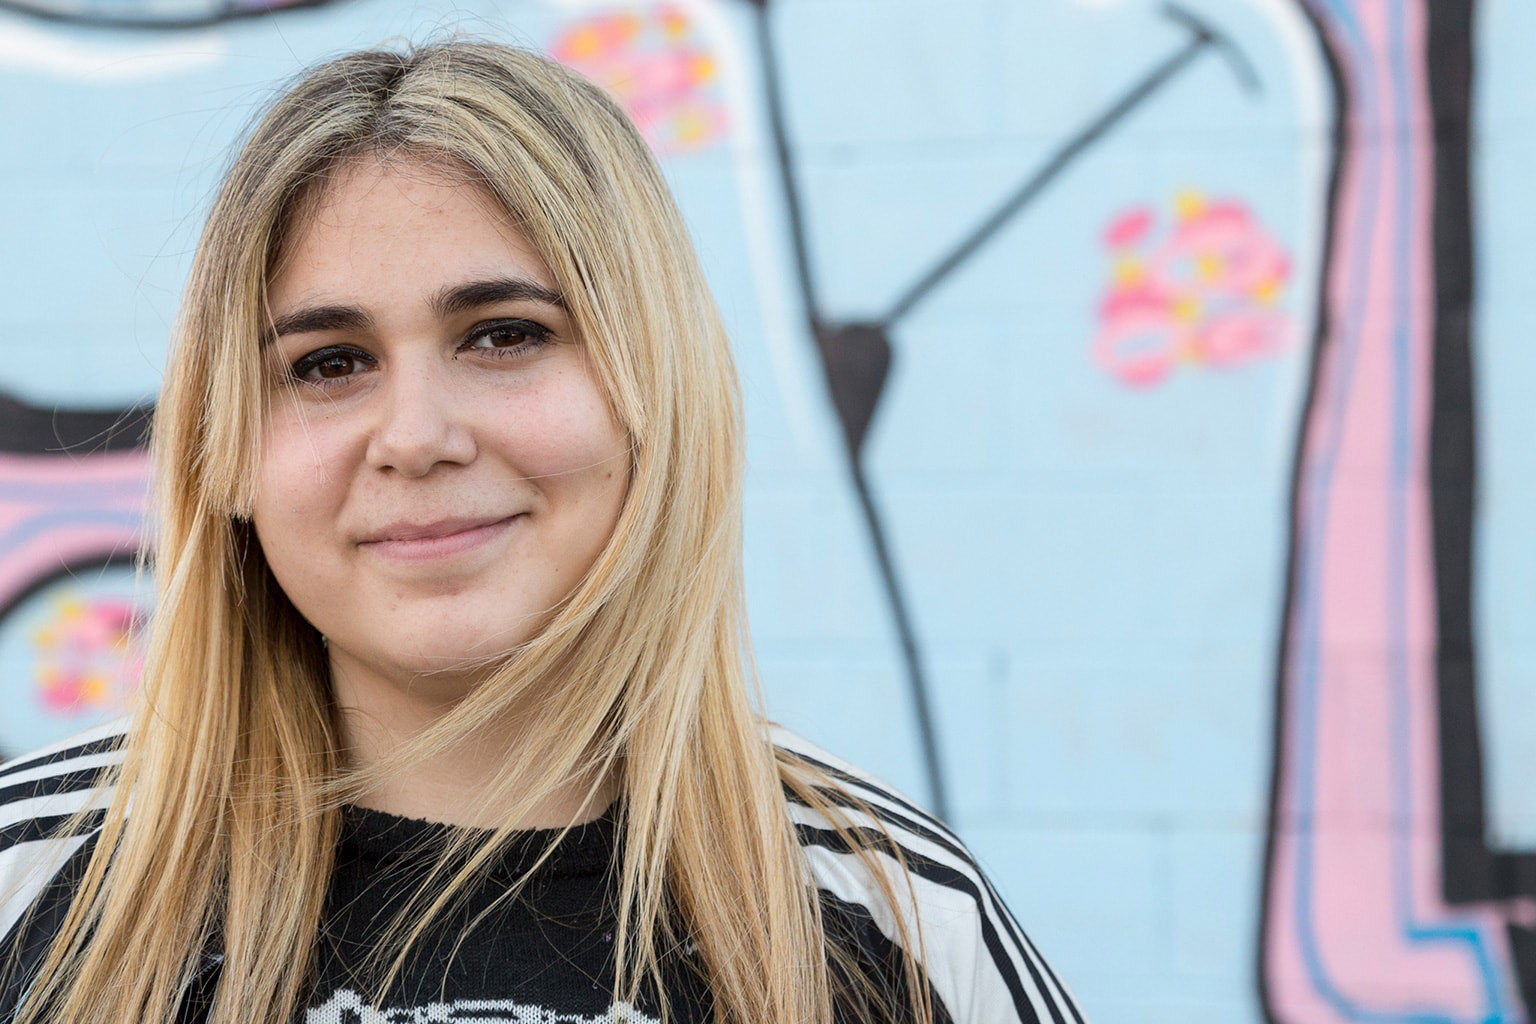 Brenda Sofia 19 years old from the city of quilmes, <br> studied law, pint or graffiti 4 years ago <br> simply because it is their cable to ground.